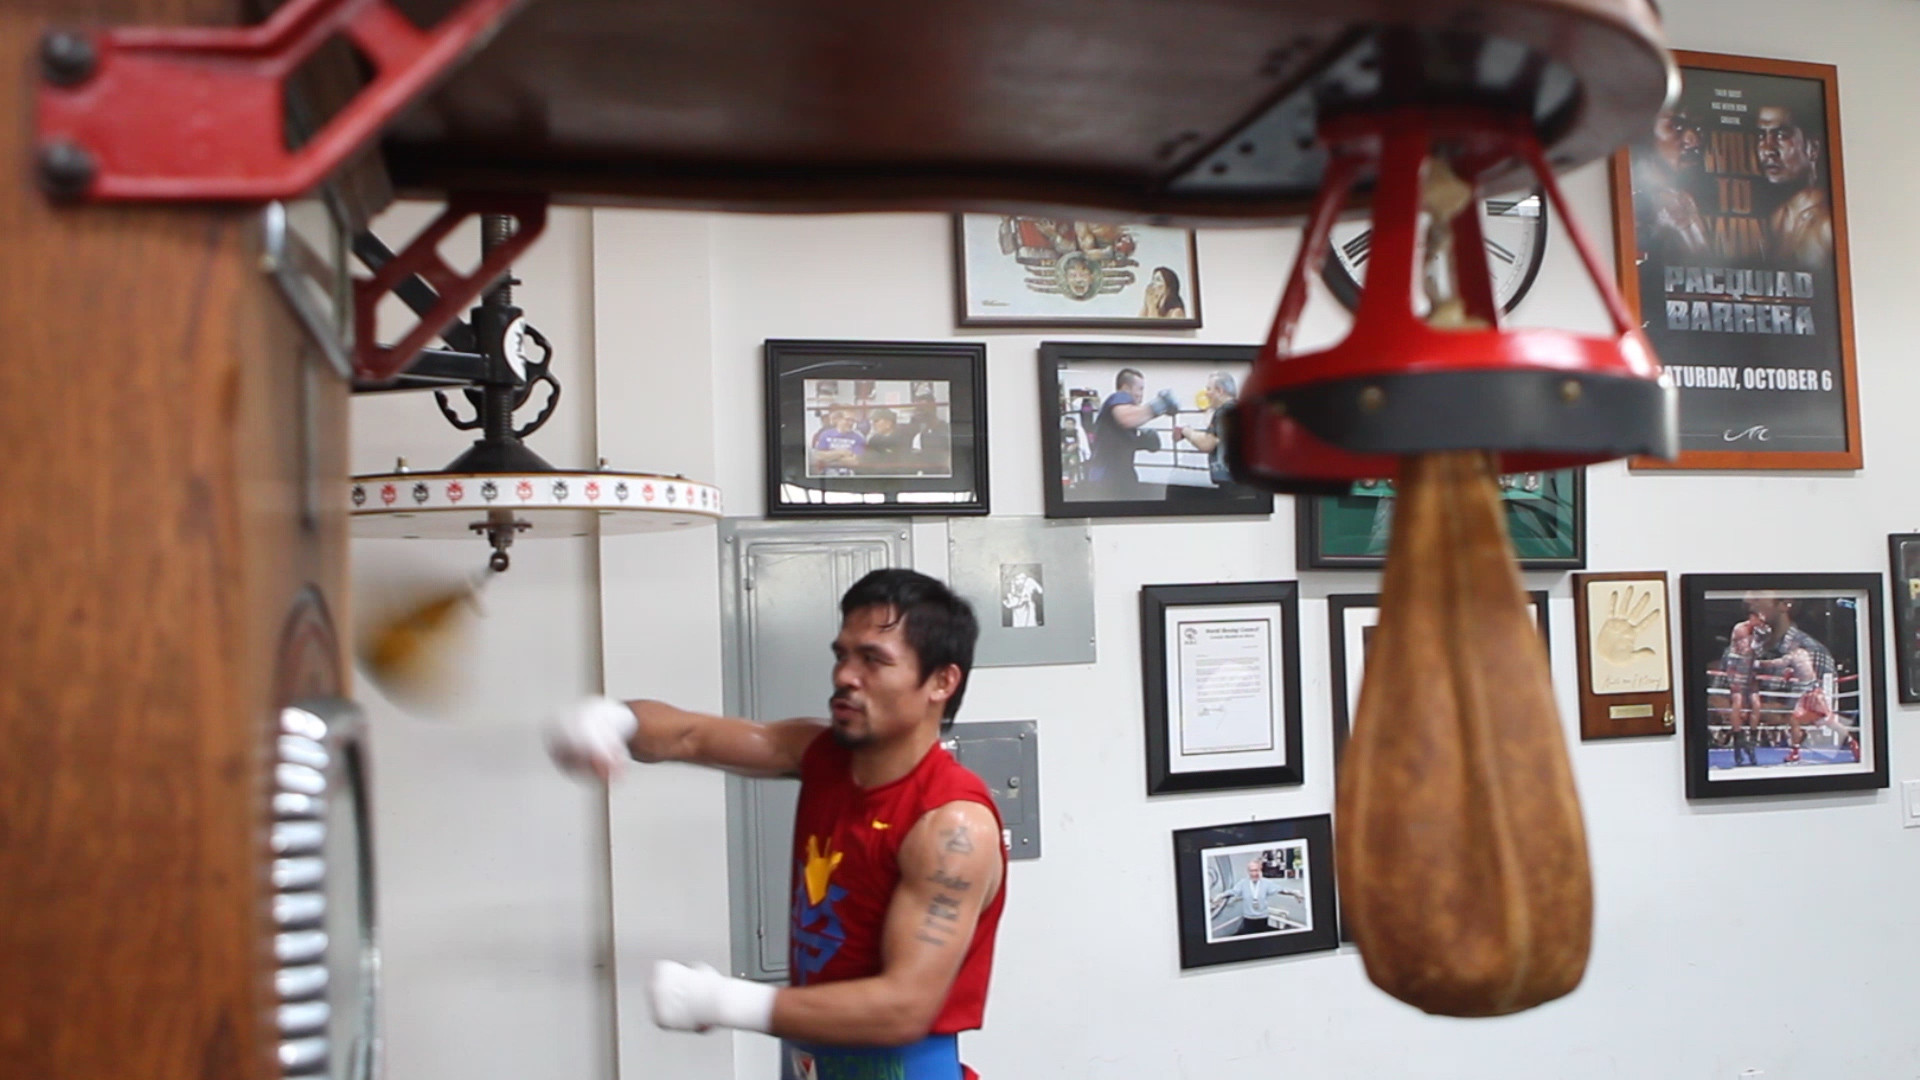 Watch Manny Pacquiao Begin Conditioning For Fight With Floyd Images, Photos, Reviews